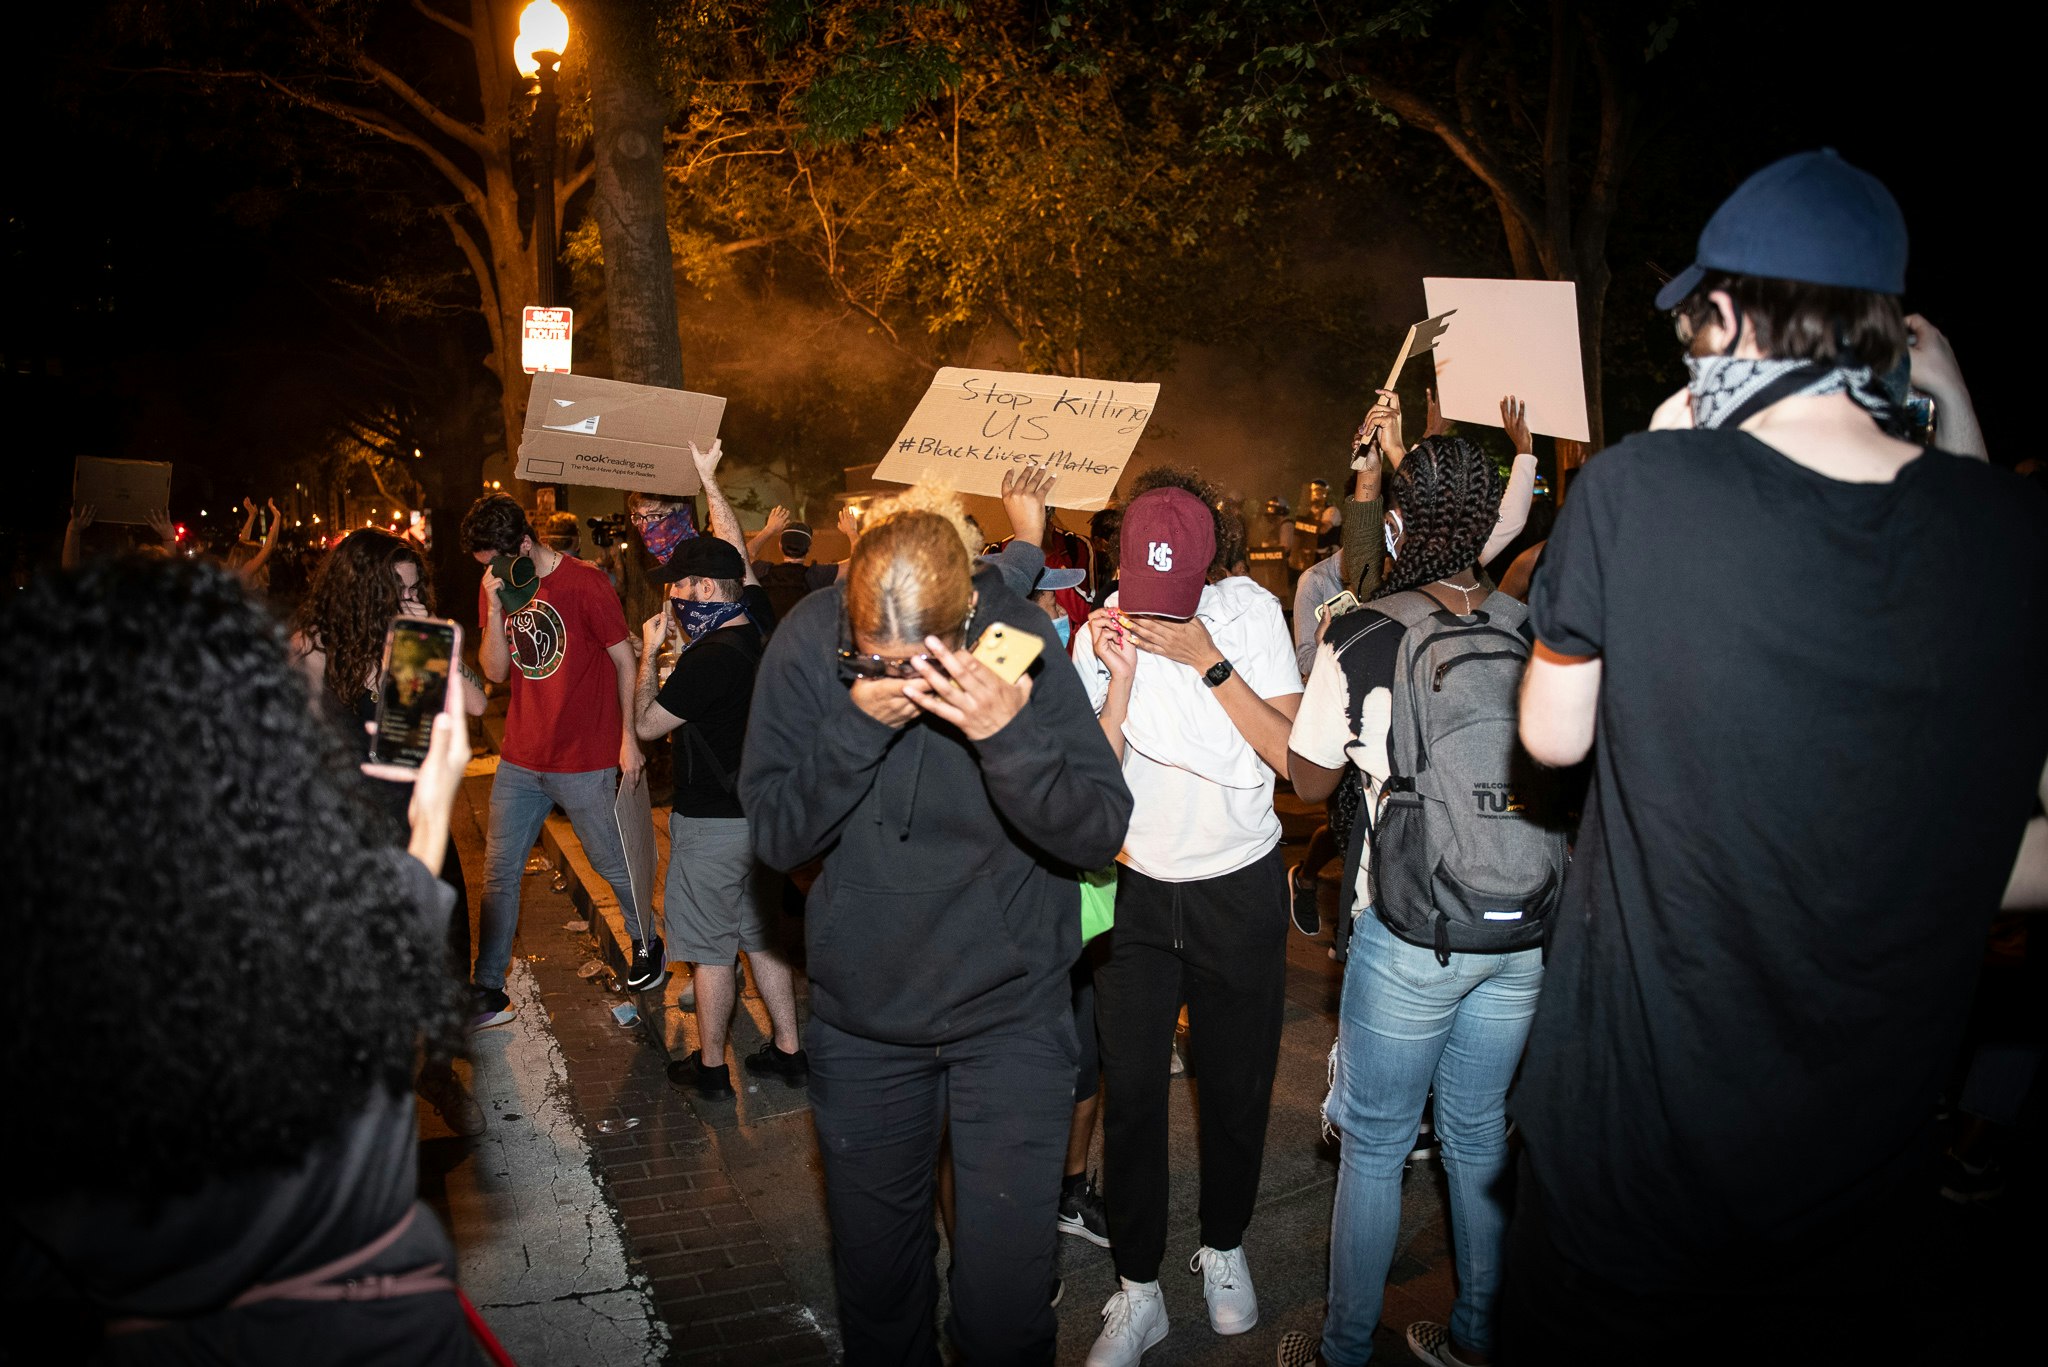 Protestors shield their faces after being exposed to tear gas at a George Floyd protest in Washington DC, 2020